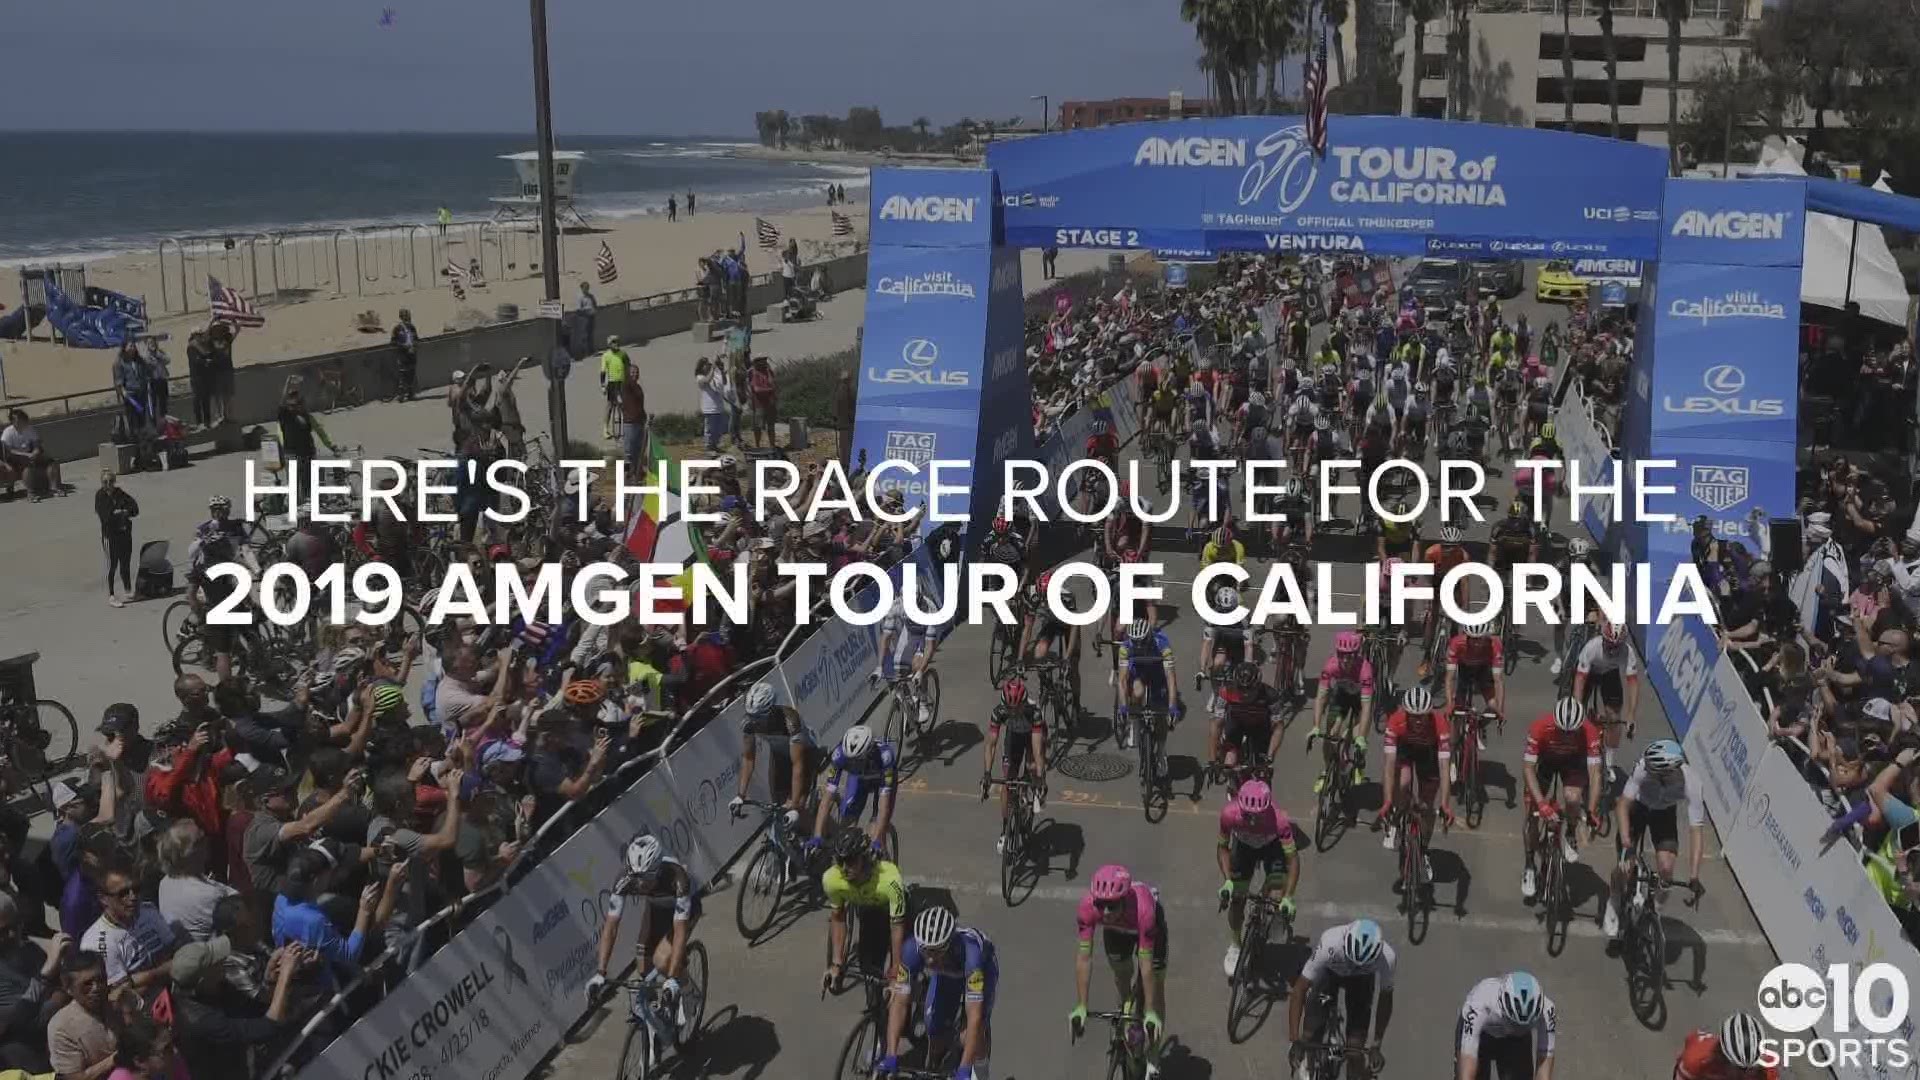 Tips for fans heading to this year's Amgen Tour of California